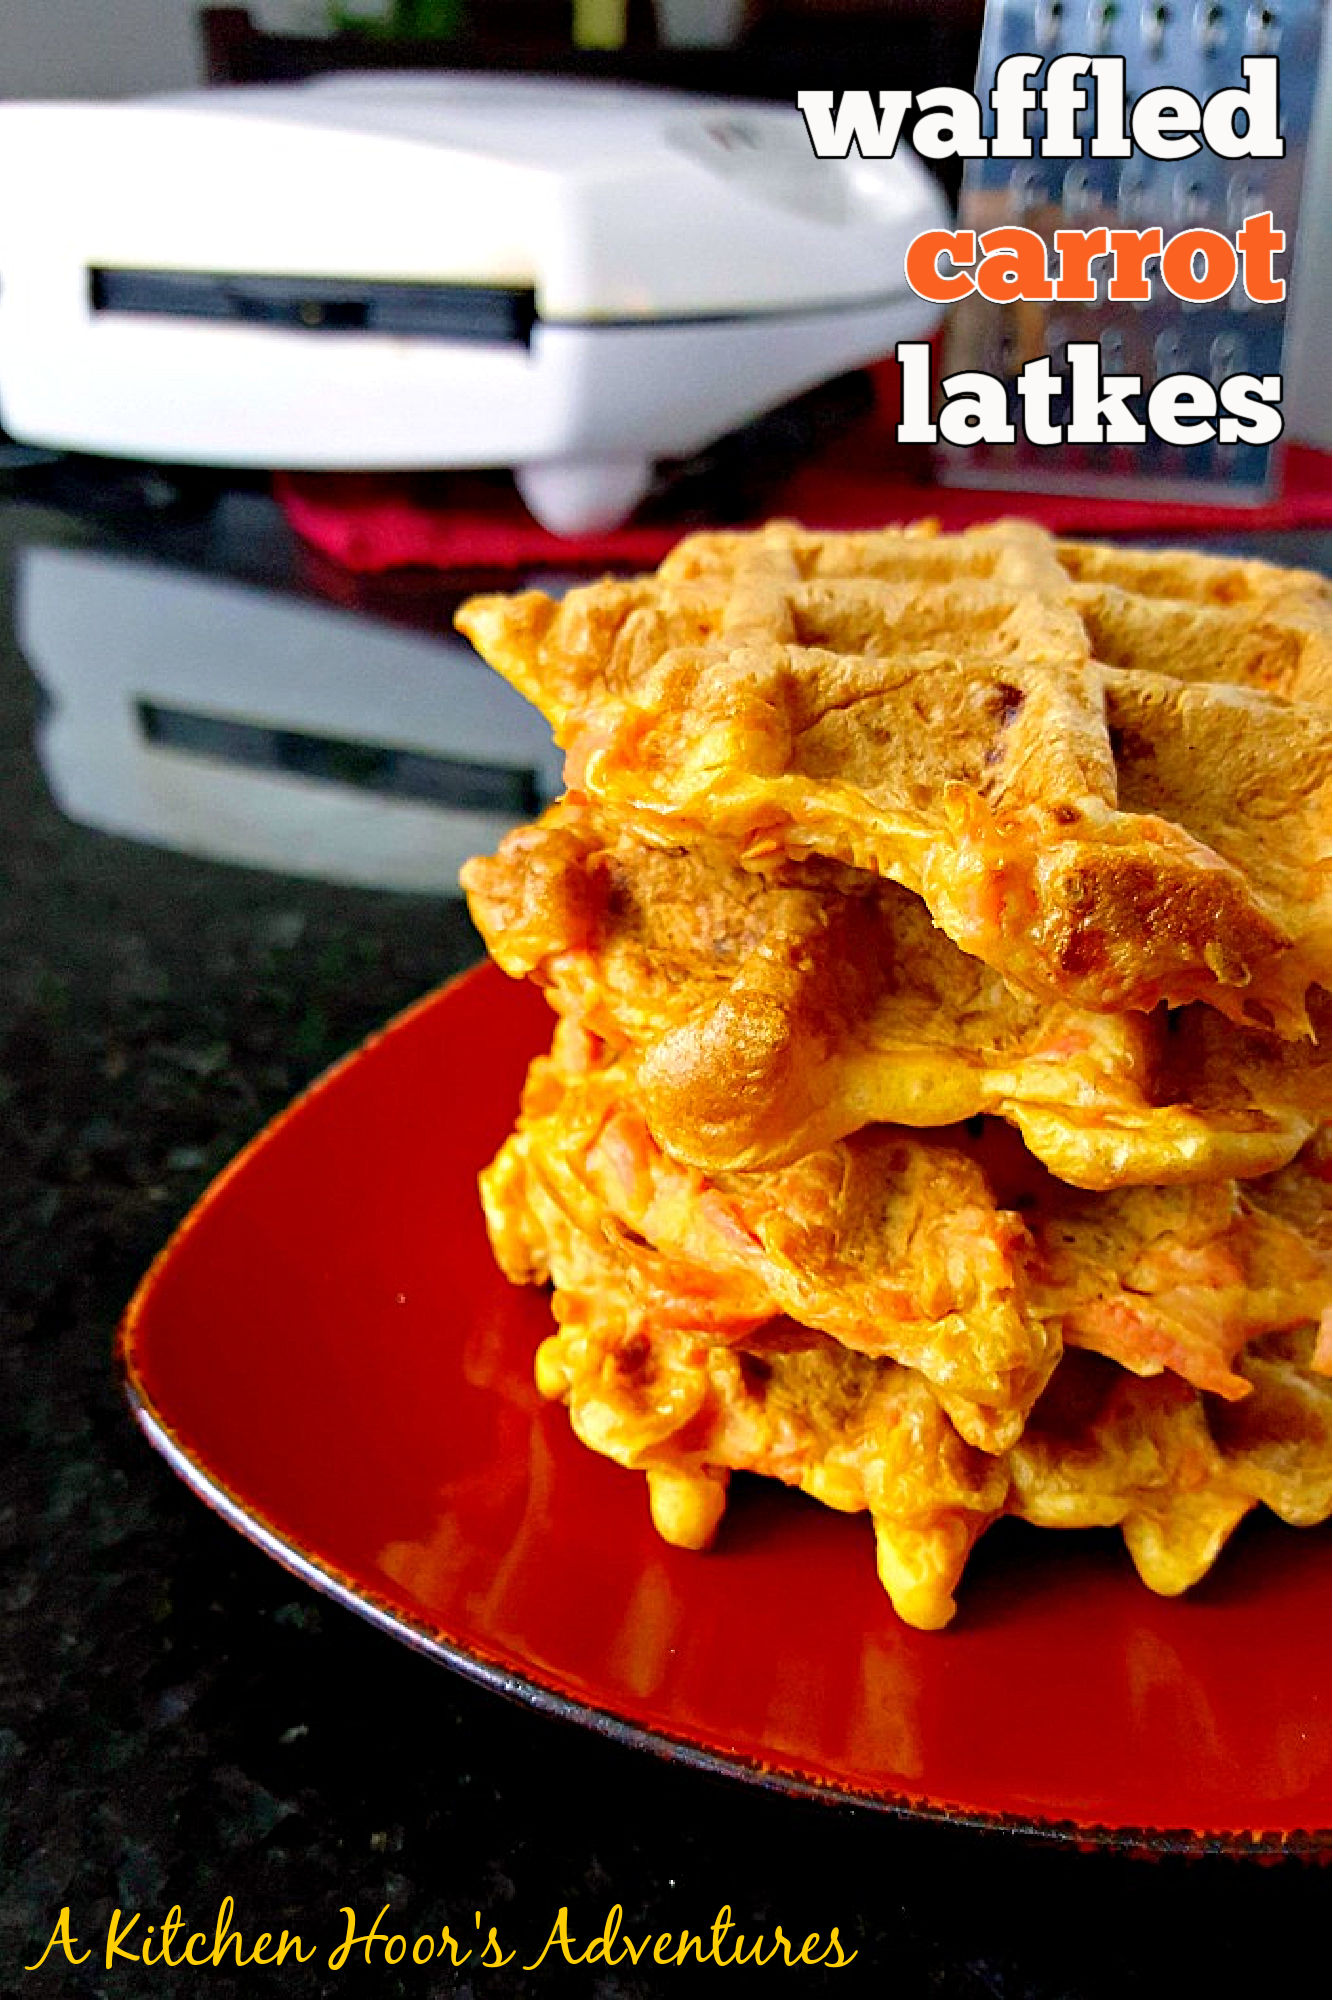 Waffled Carrot Latkes are here to revolutionize your holiday spread with a crispy, flavorful spin that will leave everyone impressed.  #WaffledCarrotLatkes #VegetarianBrunch #HealthySnacks #FoodieFavs #CreativeCooking #OurFamilyTable
